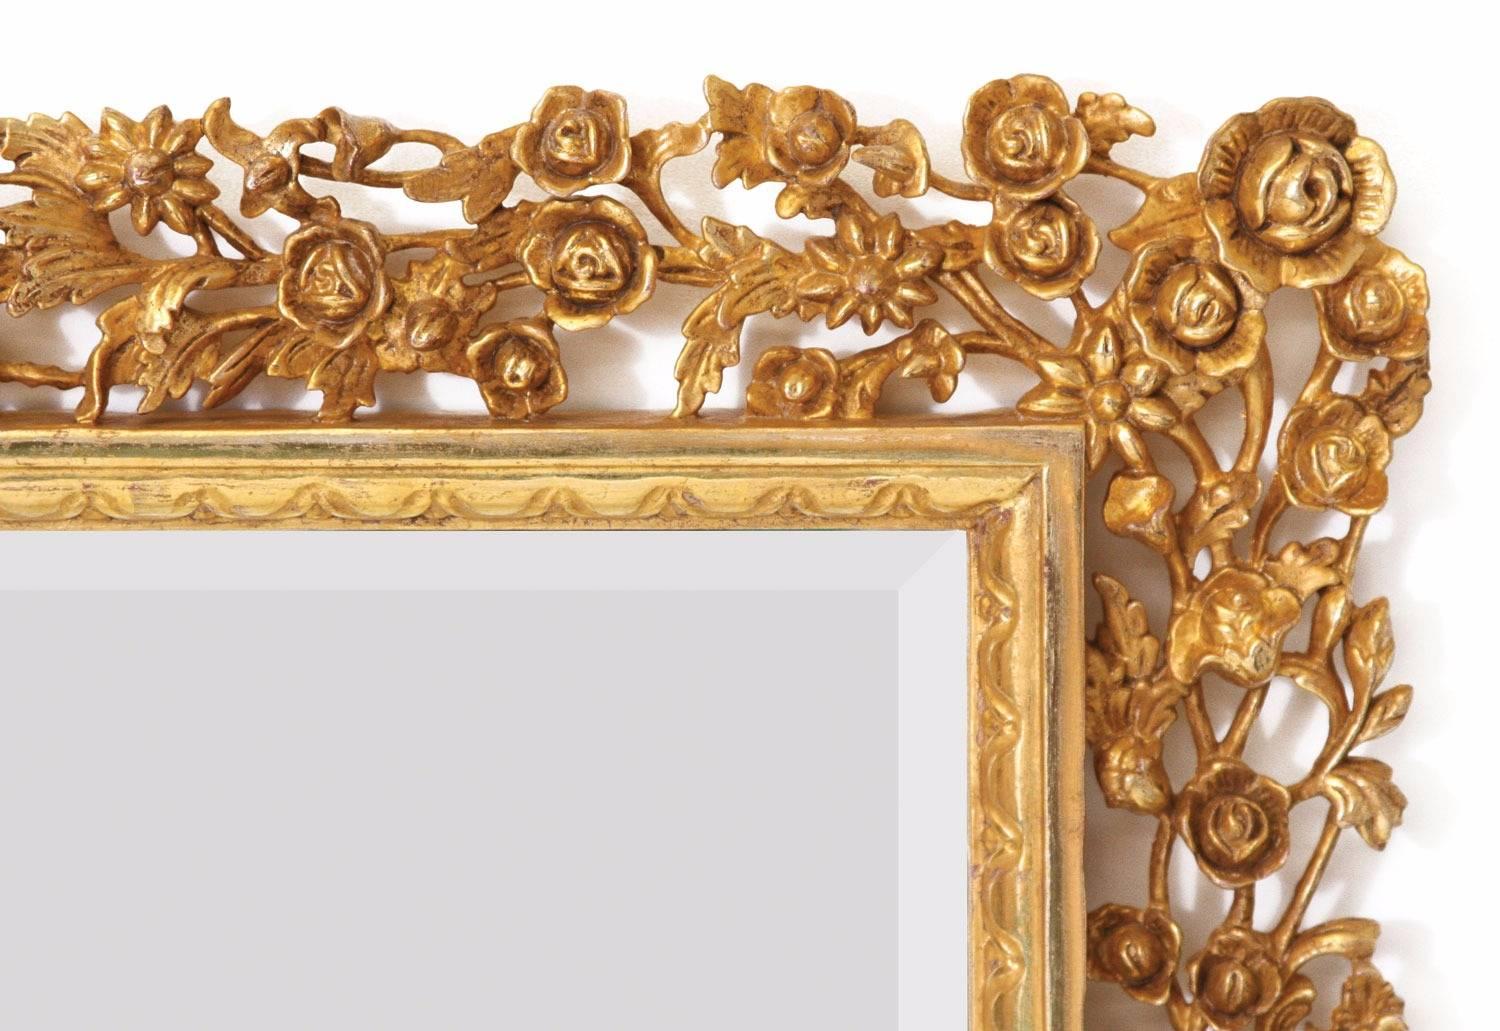 Giltwood mirror with rectangular bevelled glass plate framed with an intricately detailed repeating floral design, hand-carved in a mahogany and water gilded in 23¾ carat gold leaf. Toned with a ‘bright and matte’ effect, the highlighted areas